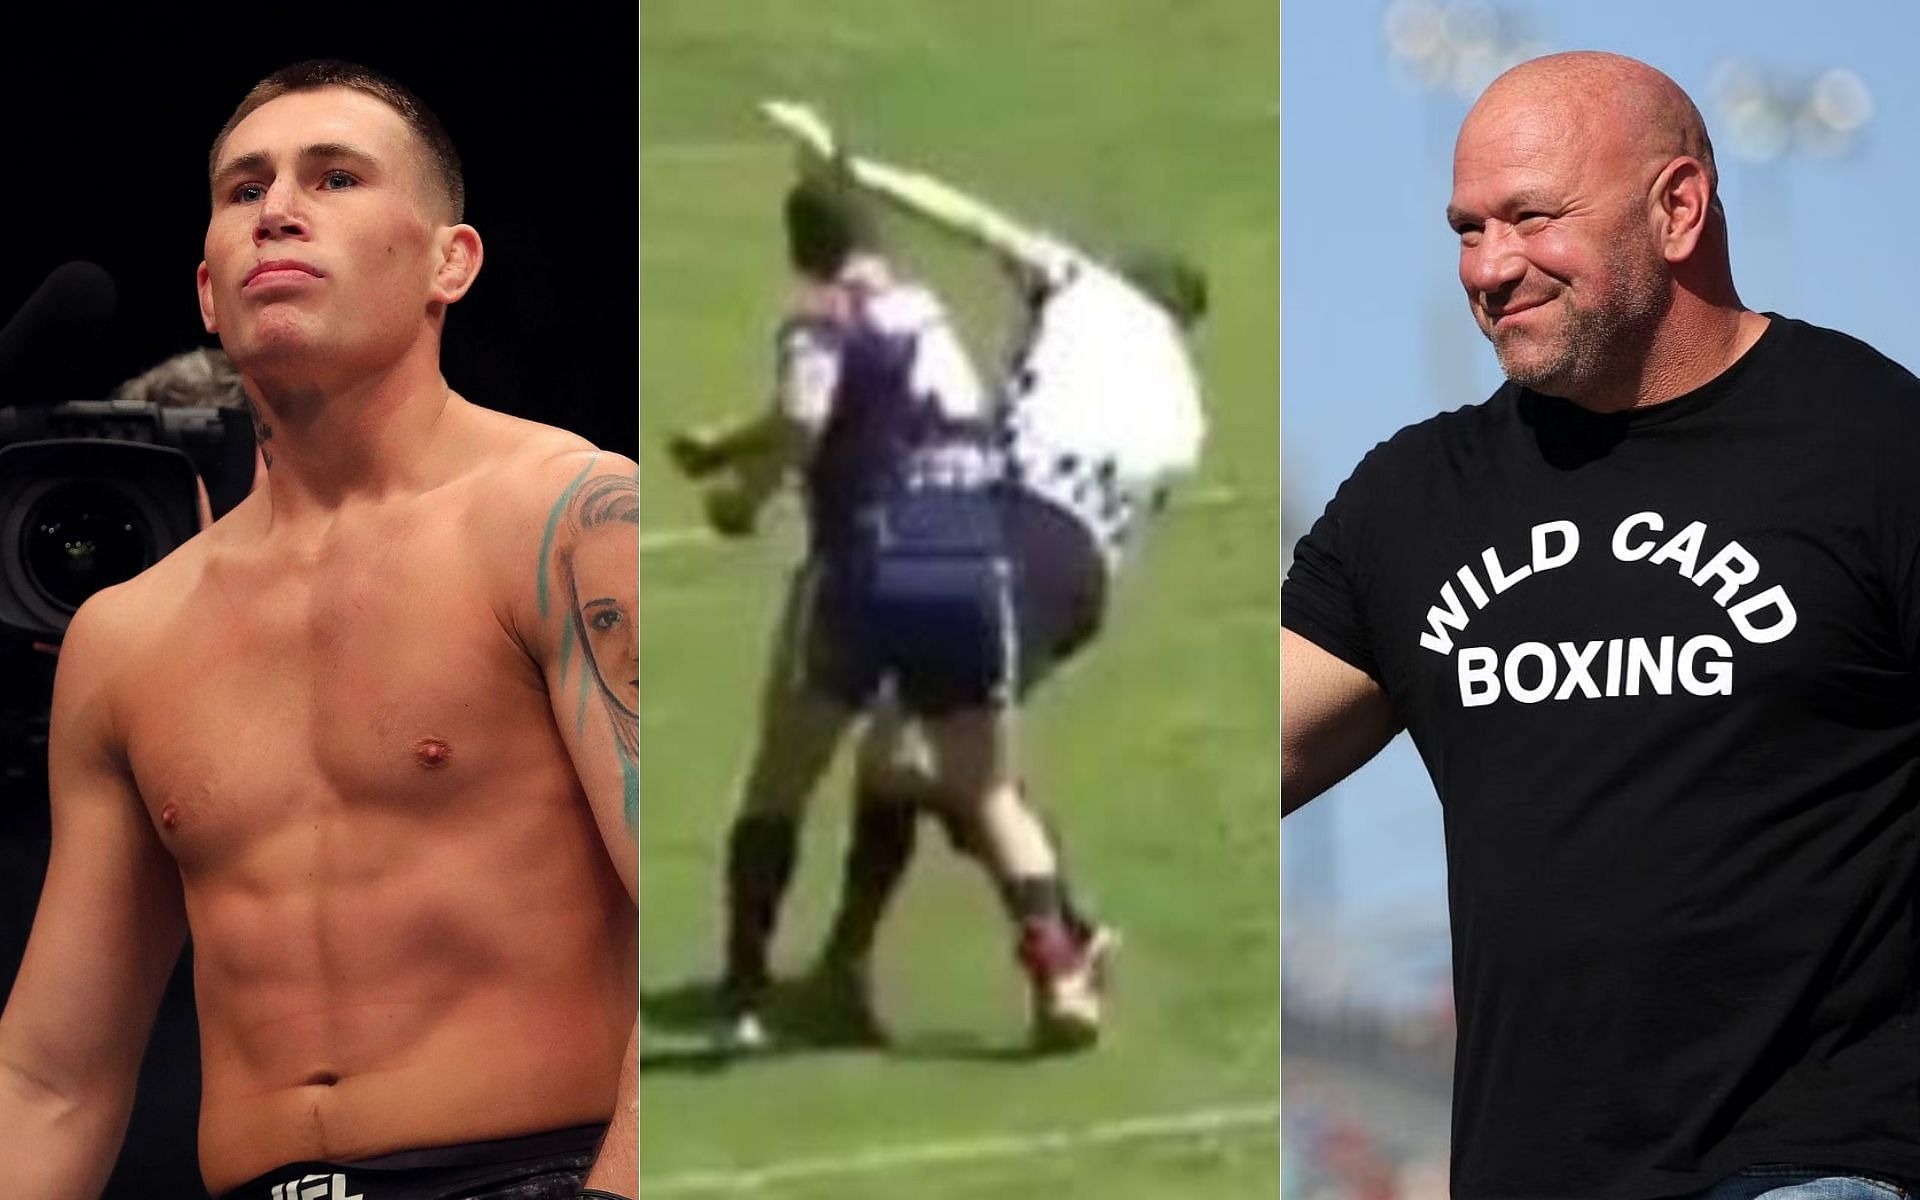 Darren Till has urged Dana White to sign the star of a brutal viral video [Image Credit: Getty and twitter.com/sky_rugby]